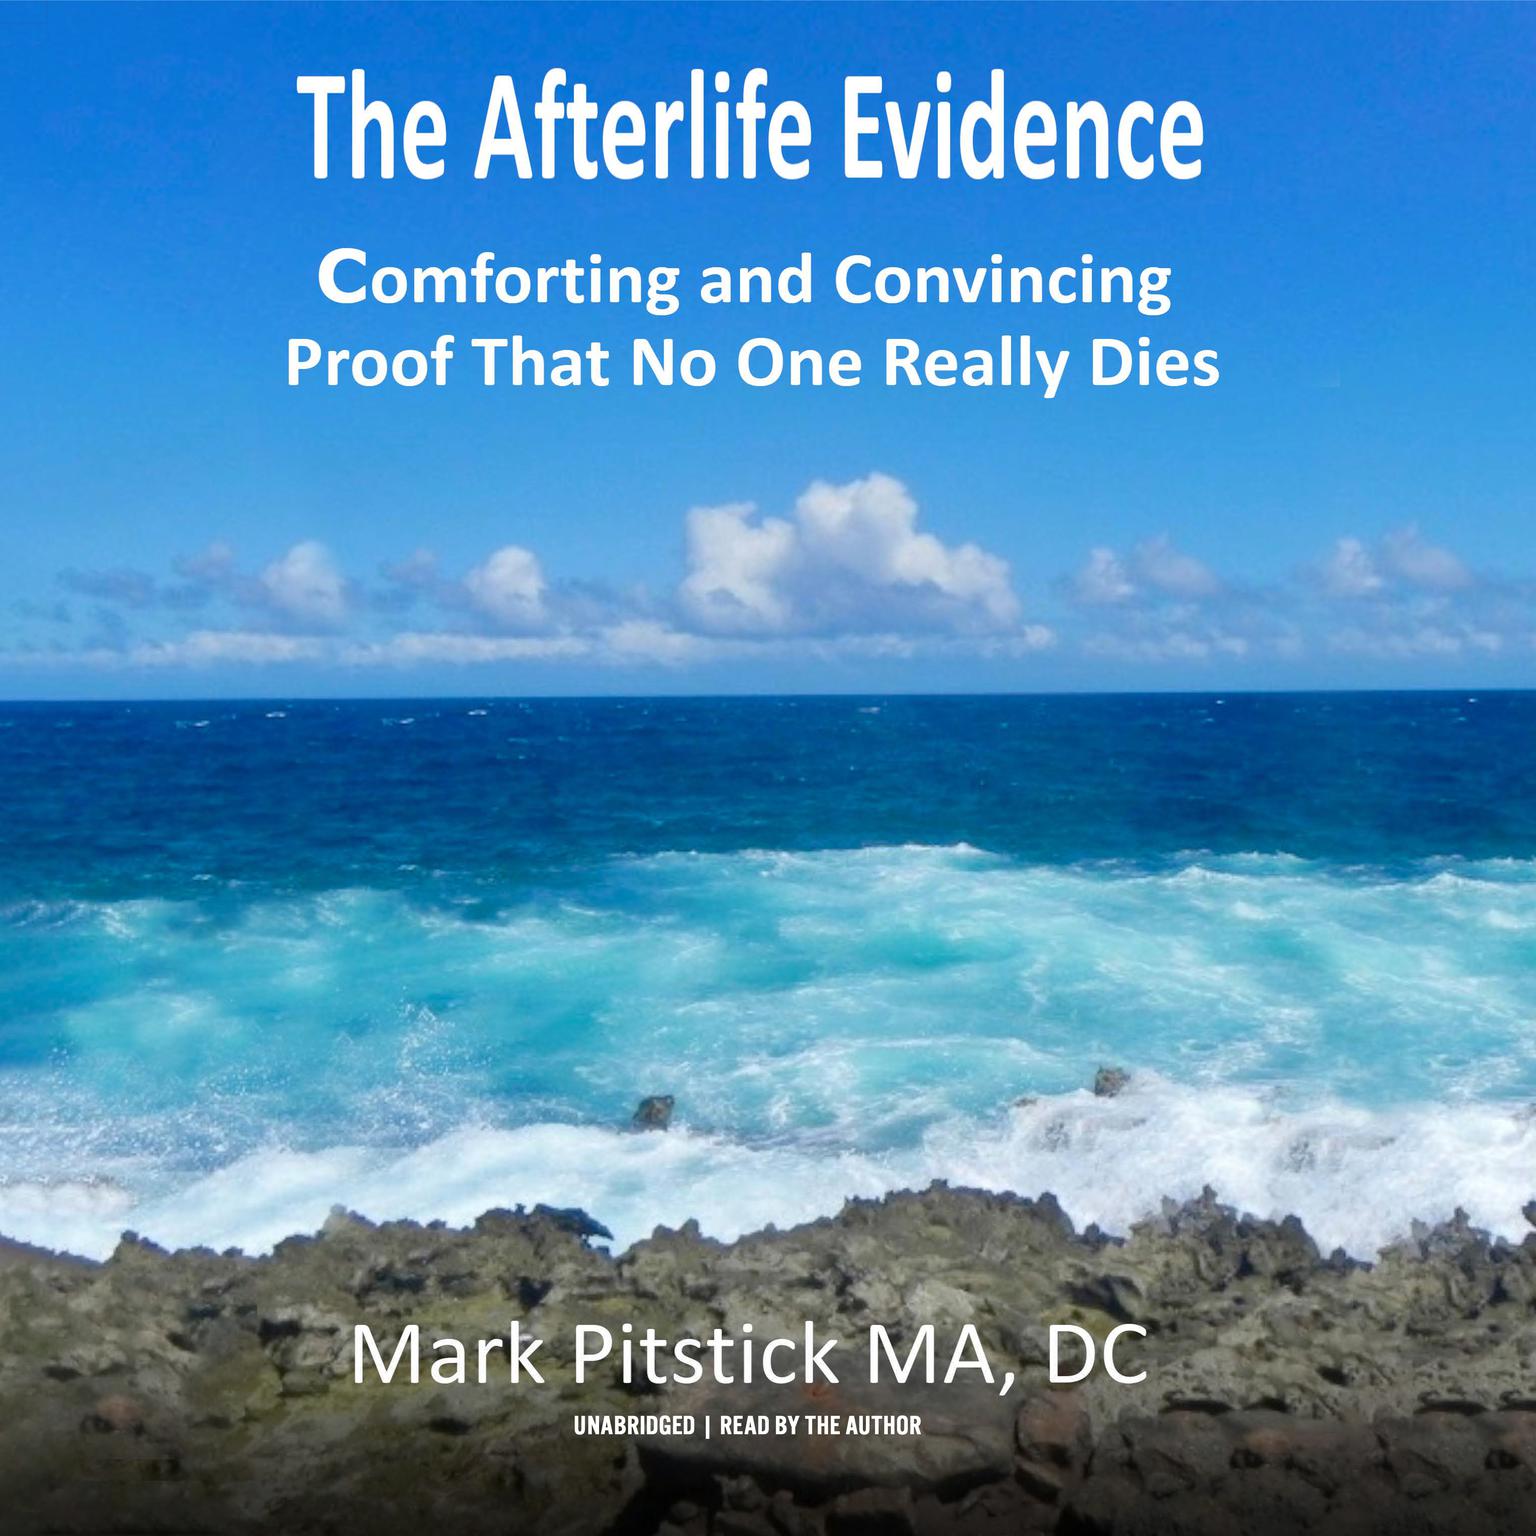 The Afterlife Evidence: Comforting and Convincing Proof That No One REALLY Dies Audiobook, by Mark Pitstick